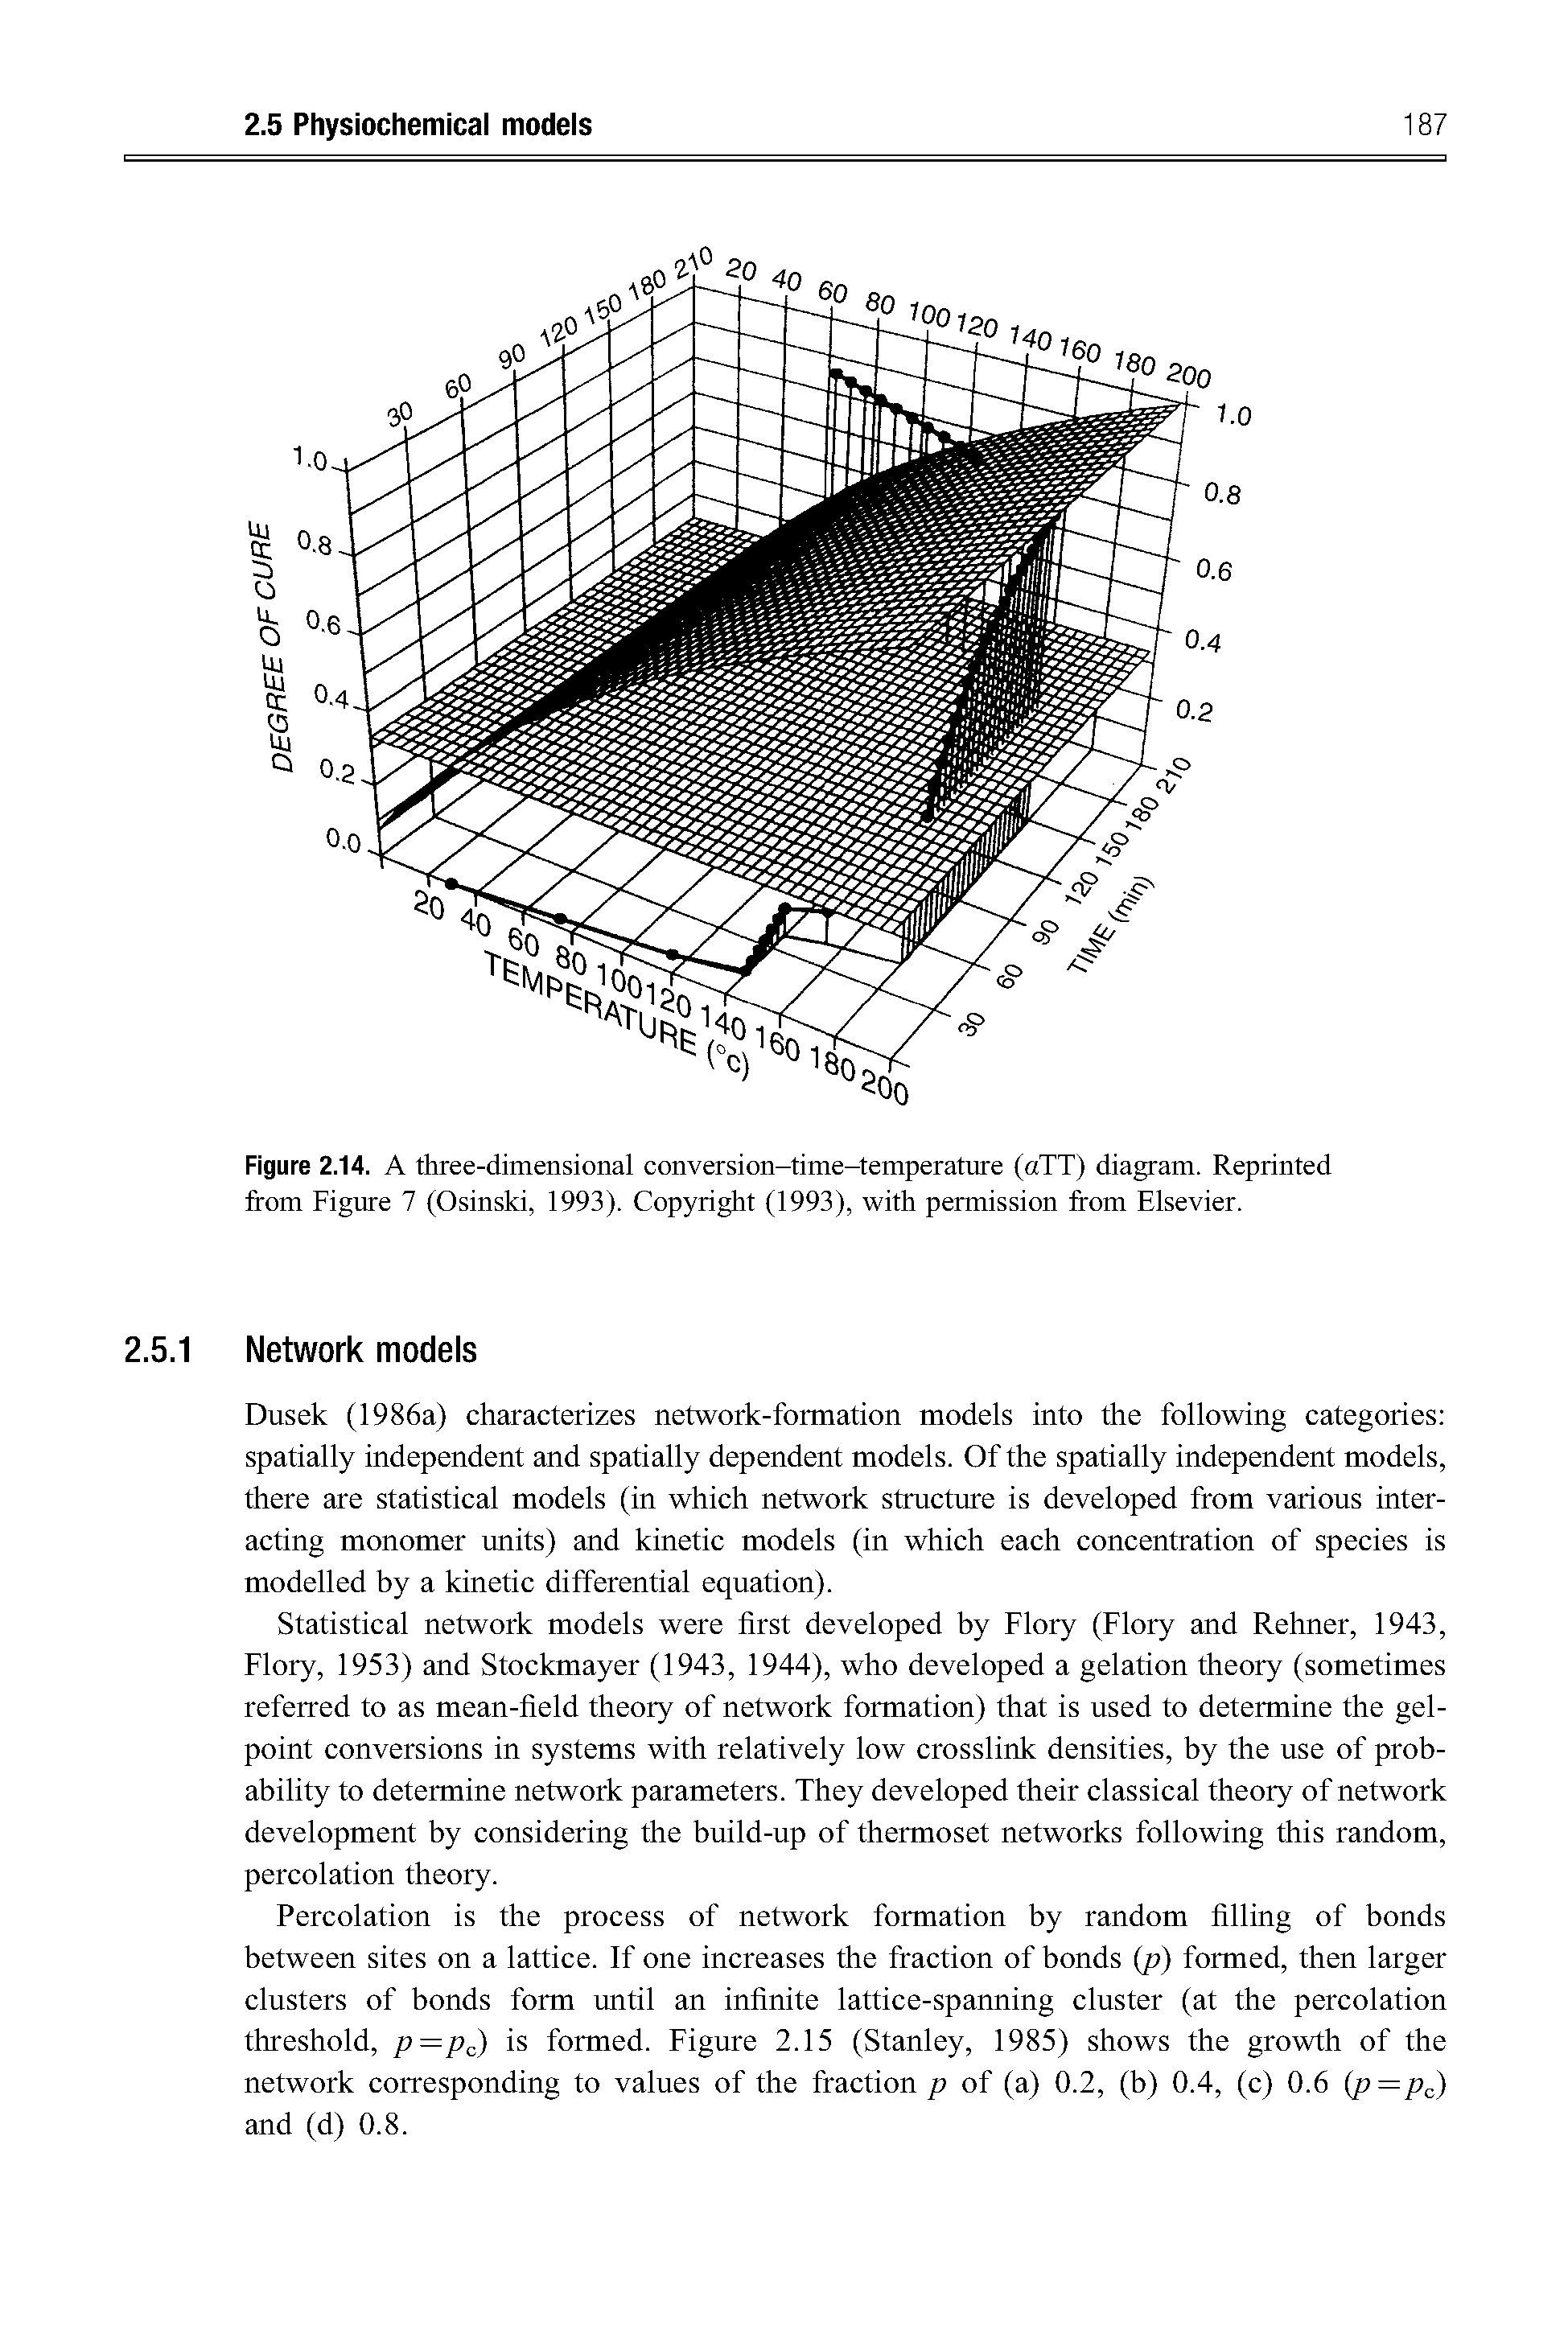 Figure 2.14. A three-dimensional conversion-time-temperature (aTT) diagram. Reprinted from Figure 7 (Osinski, 1993). Copyright (1993), with permission from Elsevier.